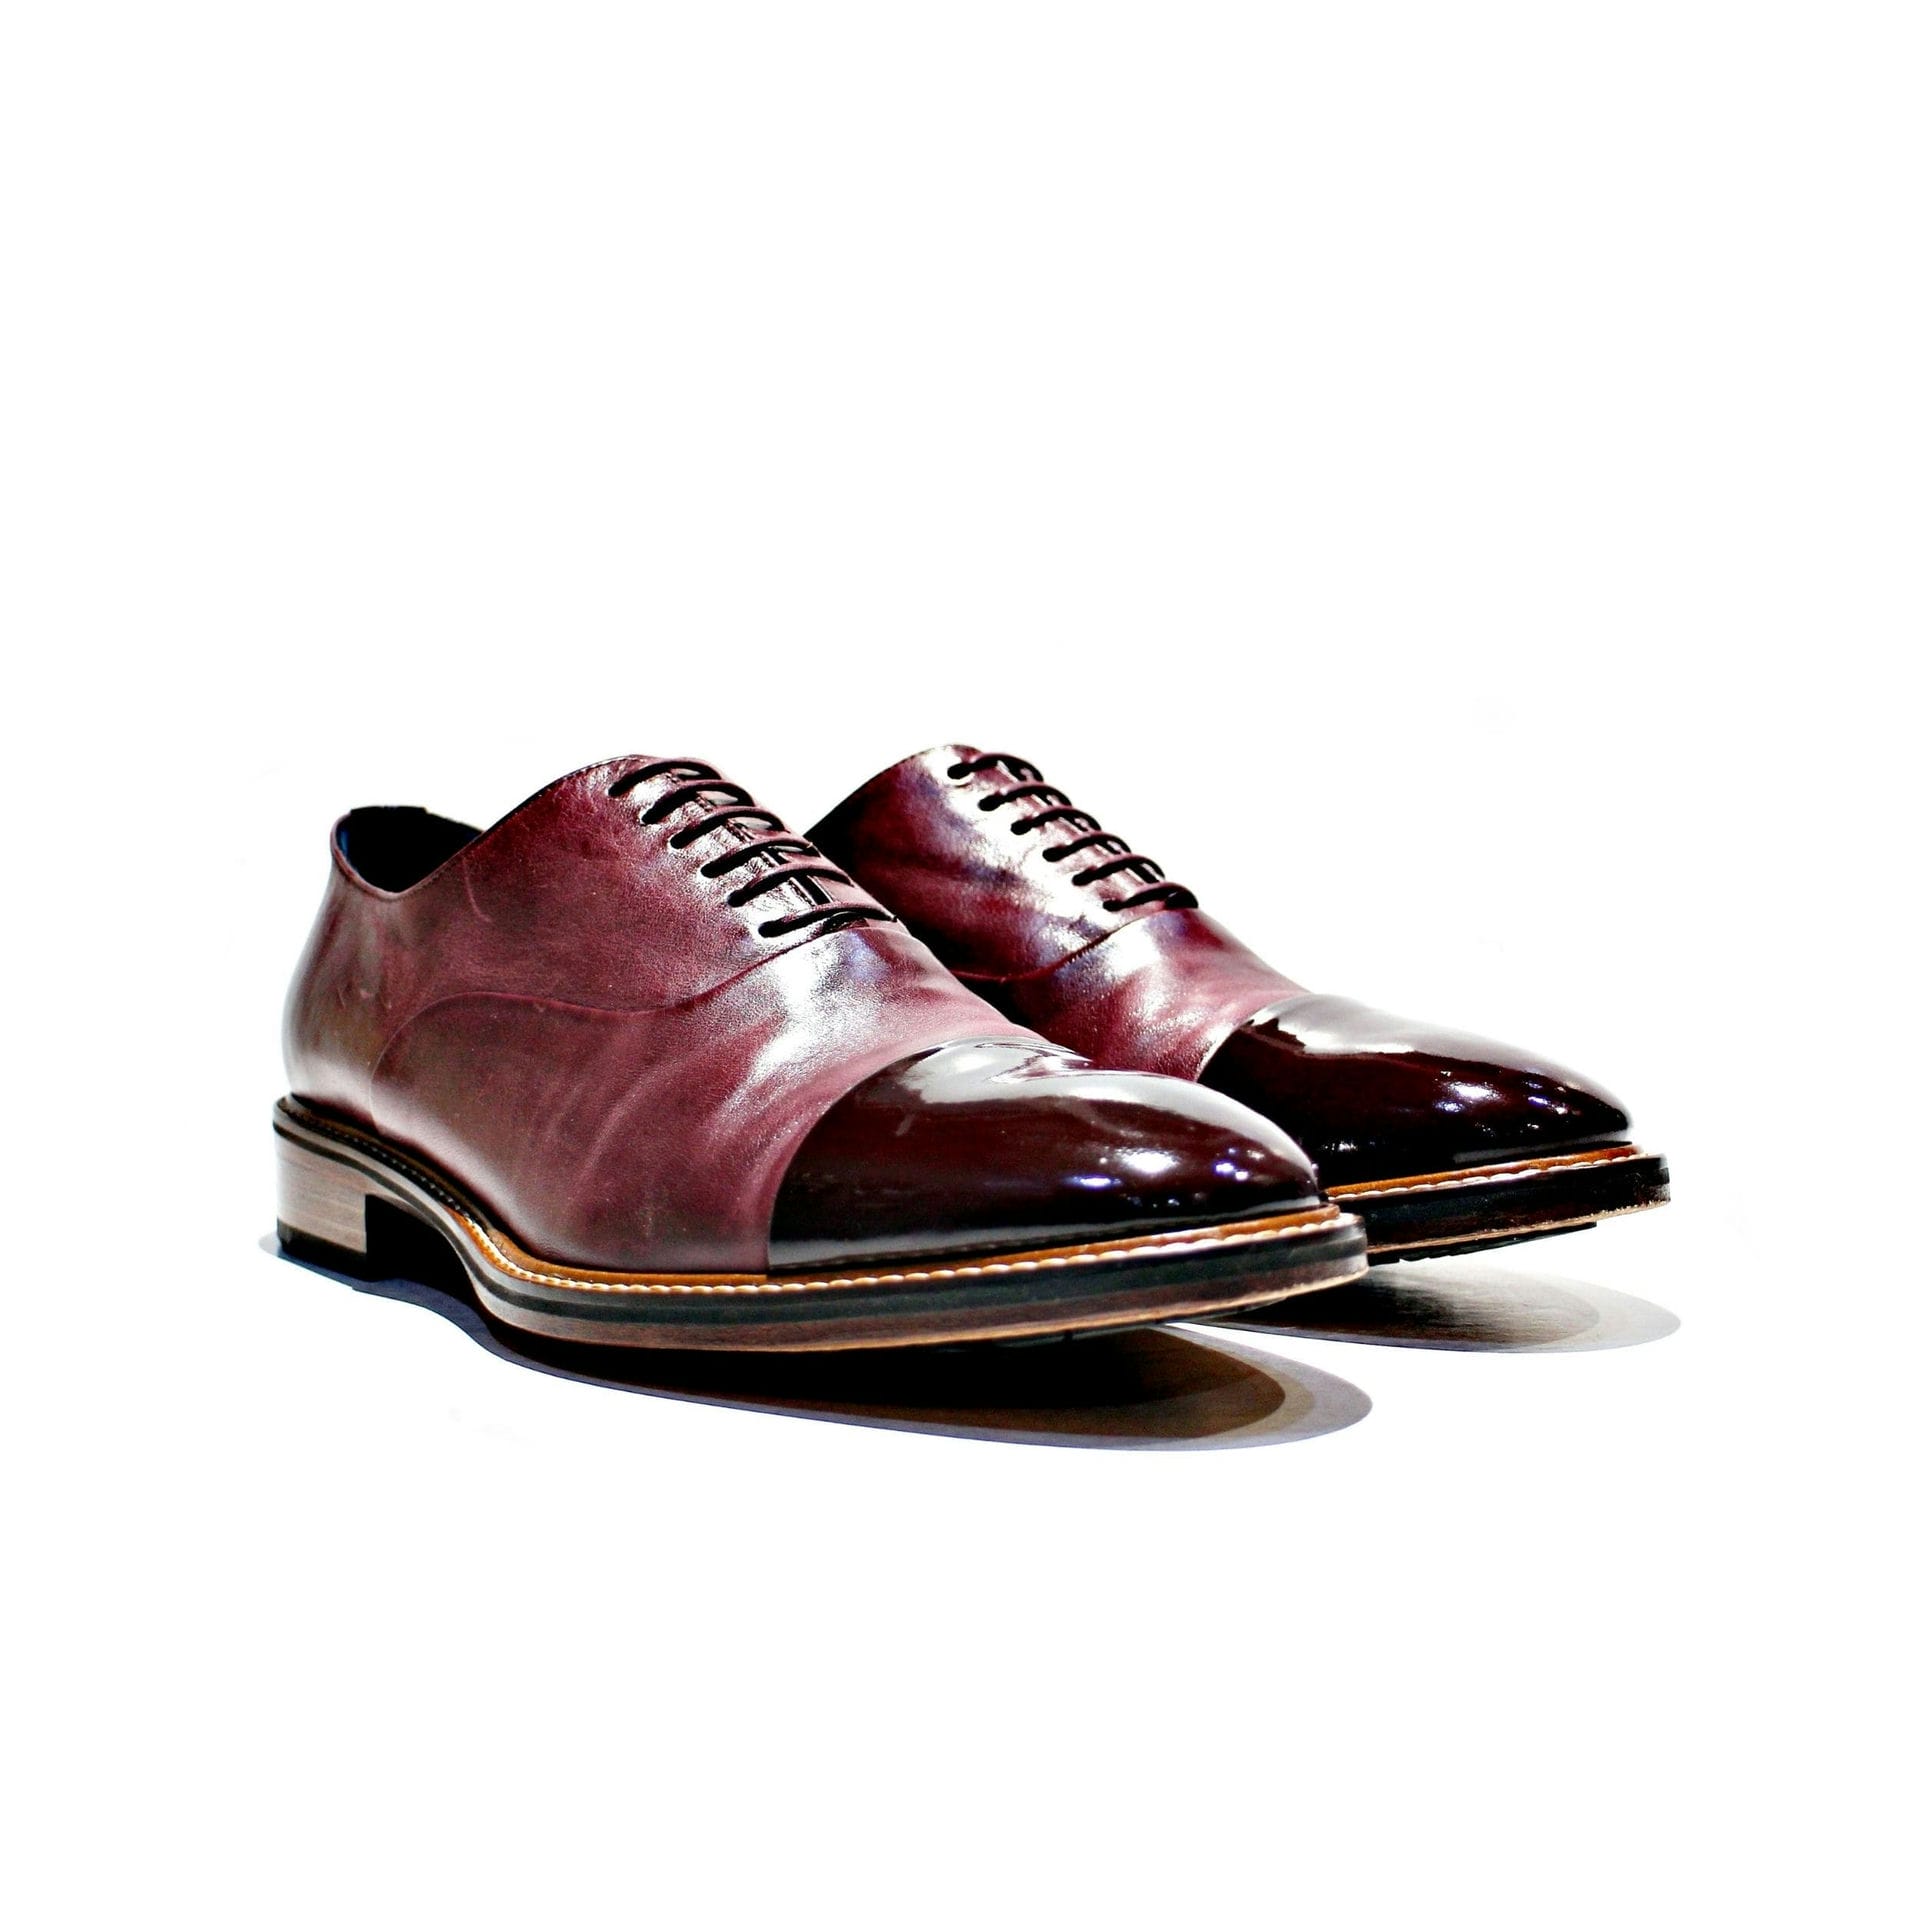 Shoe consisting of leather, varnish, leather lining, with leather sole. Handmade in Portugal. “Walk with pintta